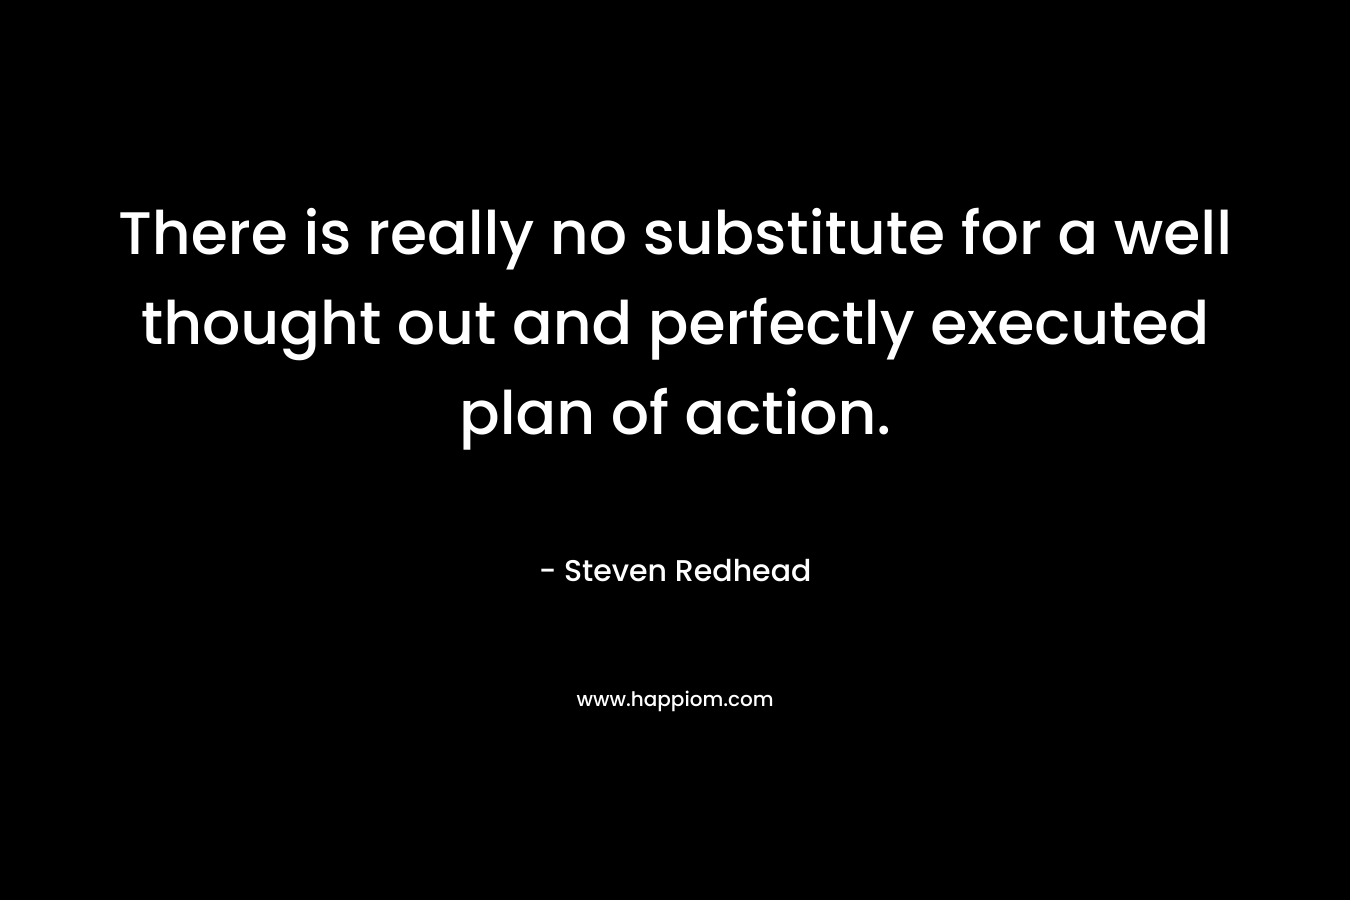 There is really no substitute for a well thought out and perfectly executed plan of action.